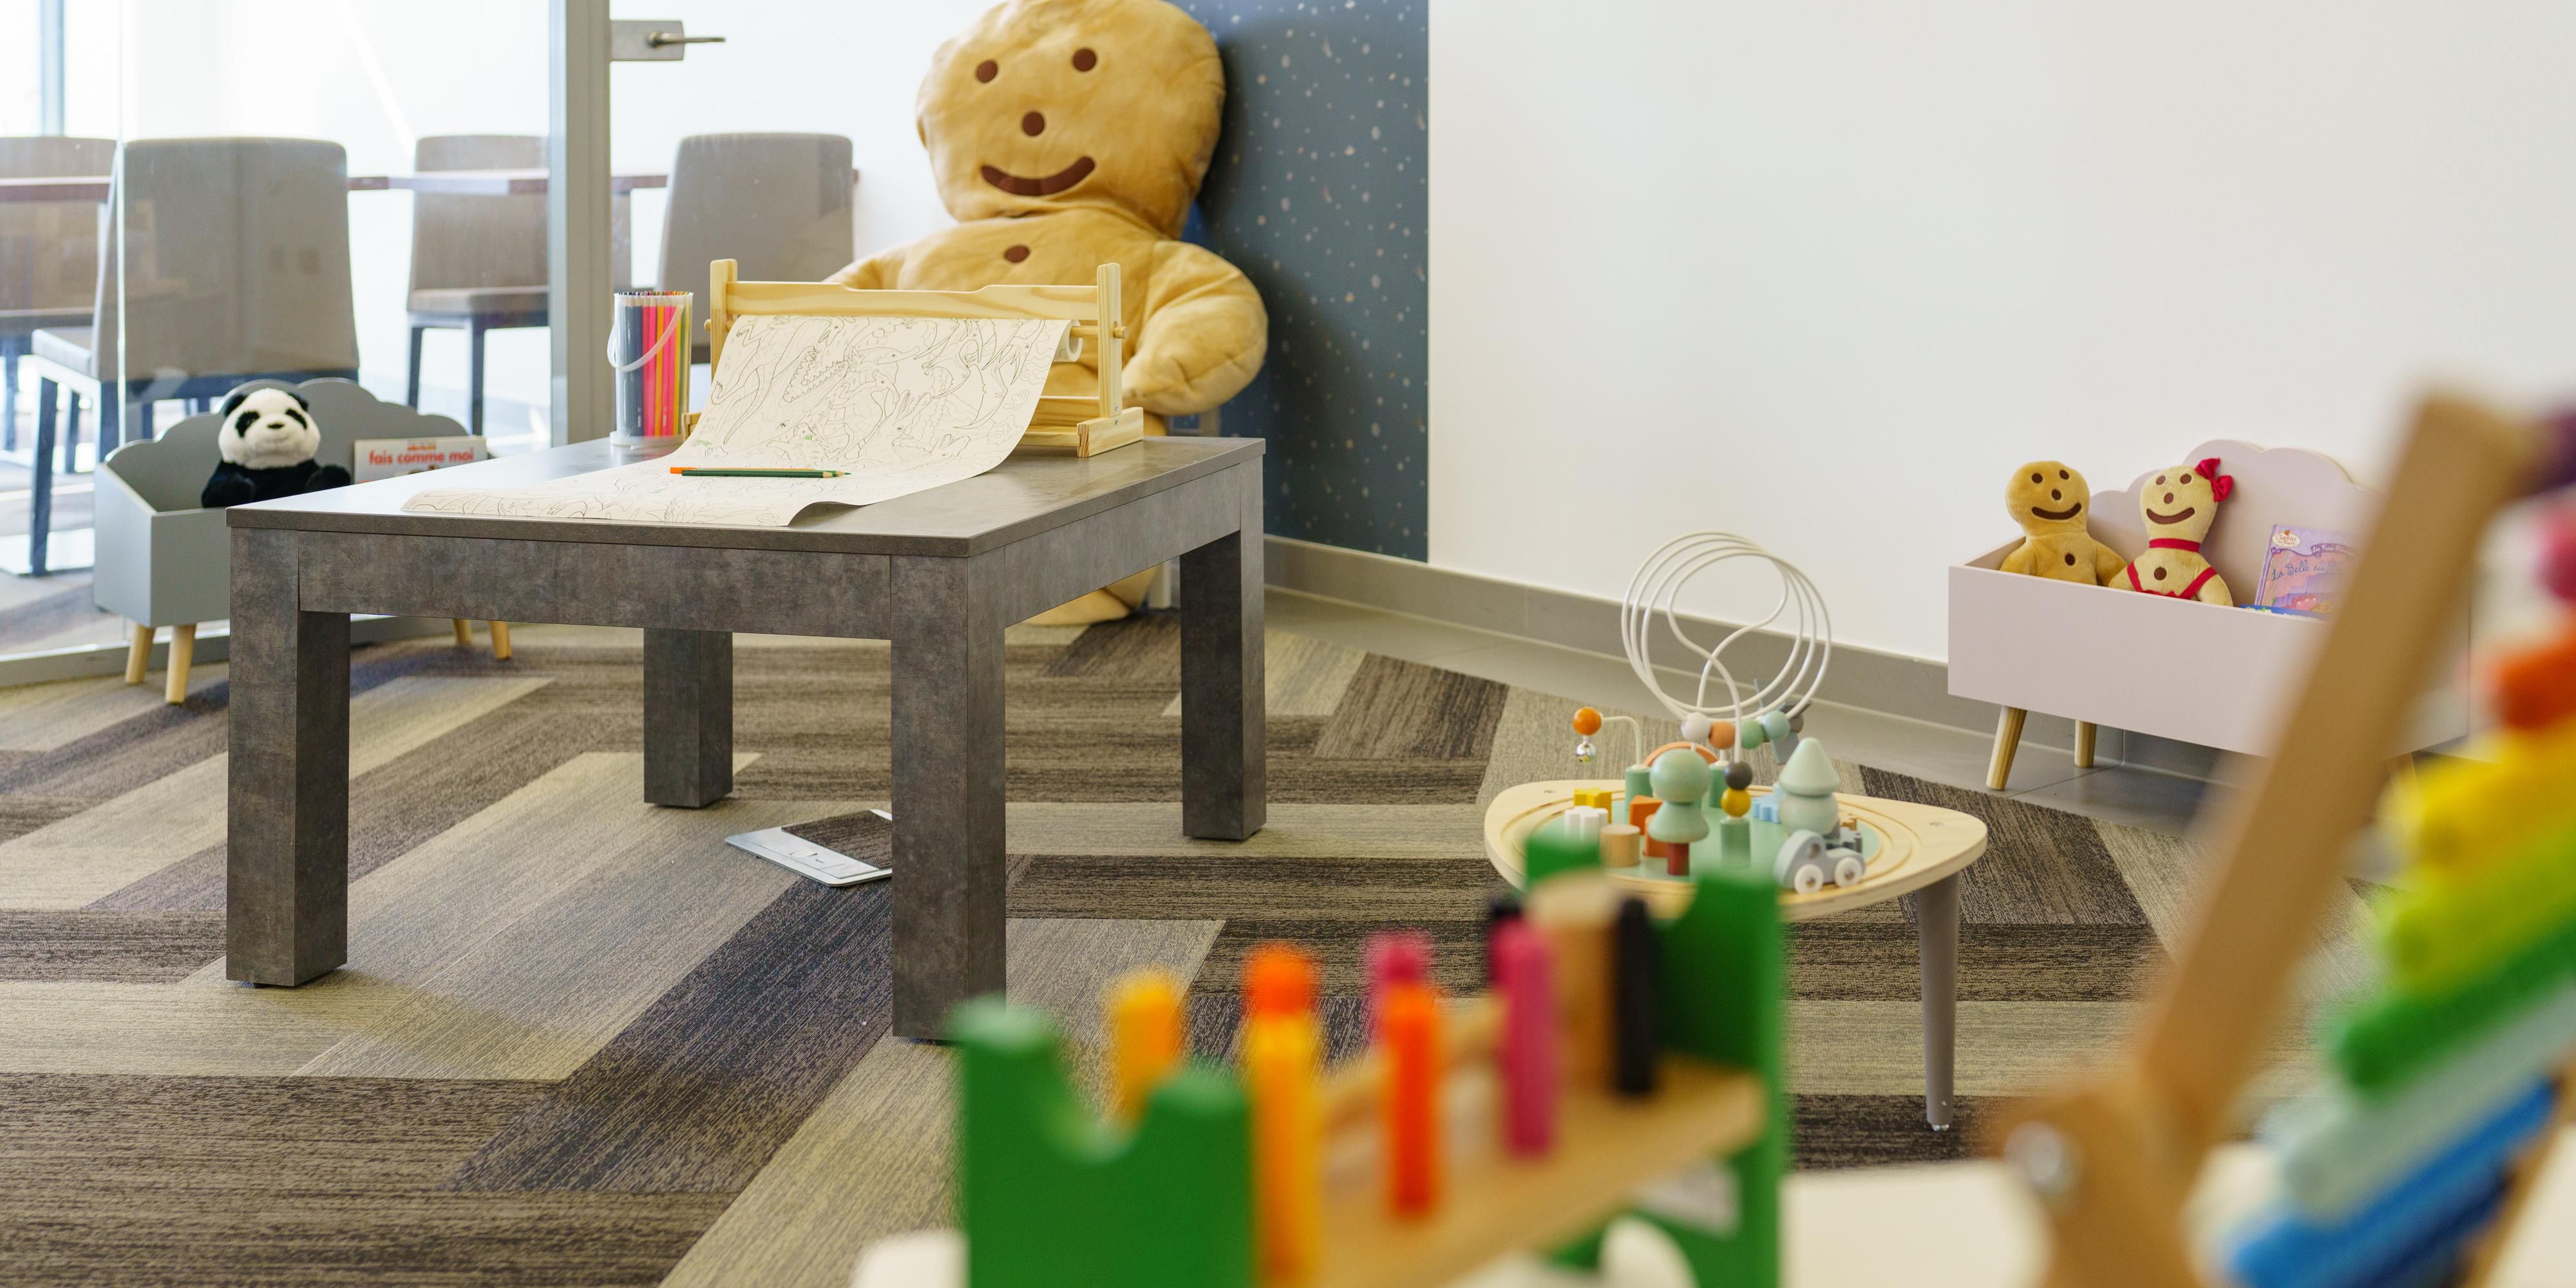 We are happy to provide you a kids playroom in our lobby!